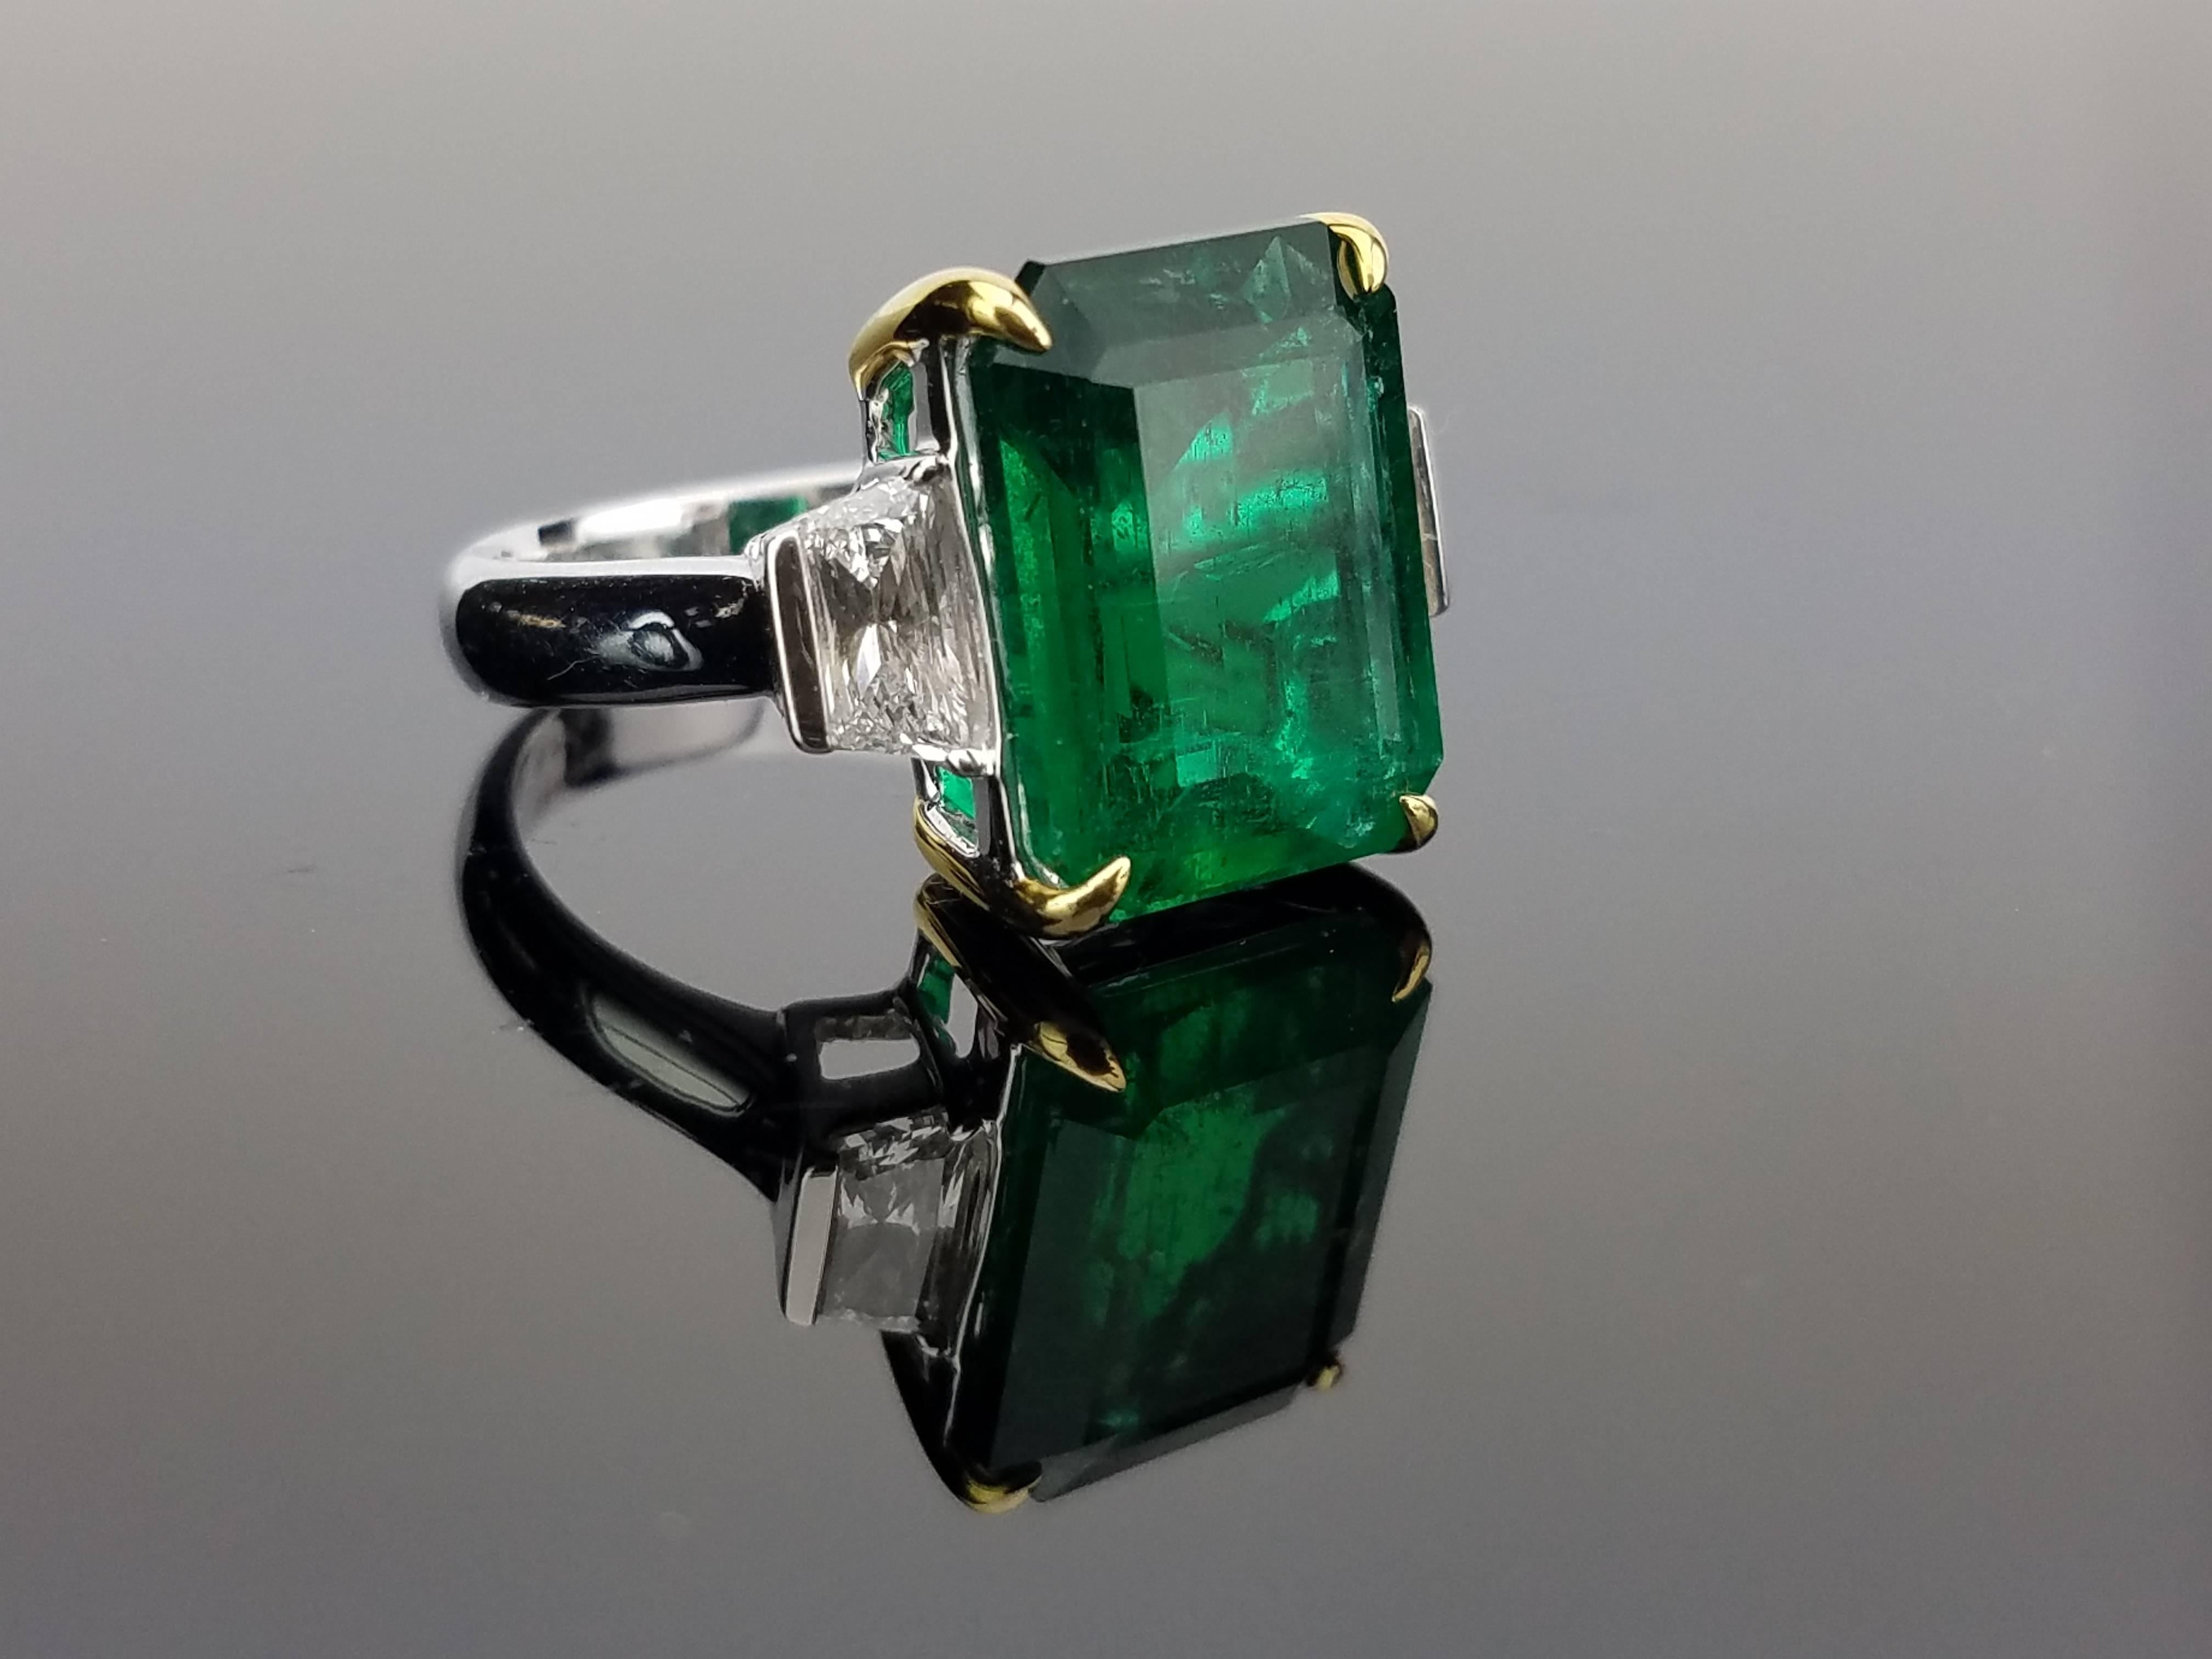 Beautiful Classic Zambian Emerald Ring with Yellow Gold prongs, and 2 Diamond side stones set in 18K White Gold hoop

Center Stone Details: 
Stone: Zambian Emerald
Cut: Emerald Cut
Weight: 8.01

Diamond Details: 
Cut: 2 x Trapezium
Total Carat